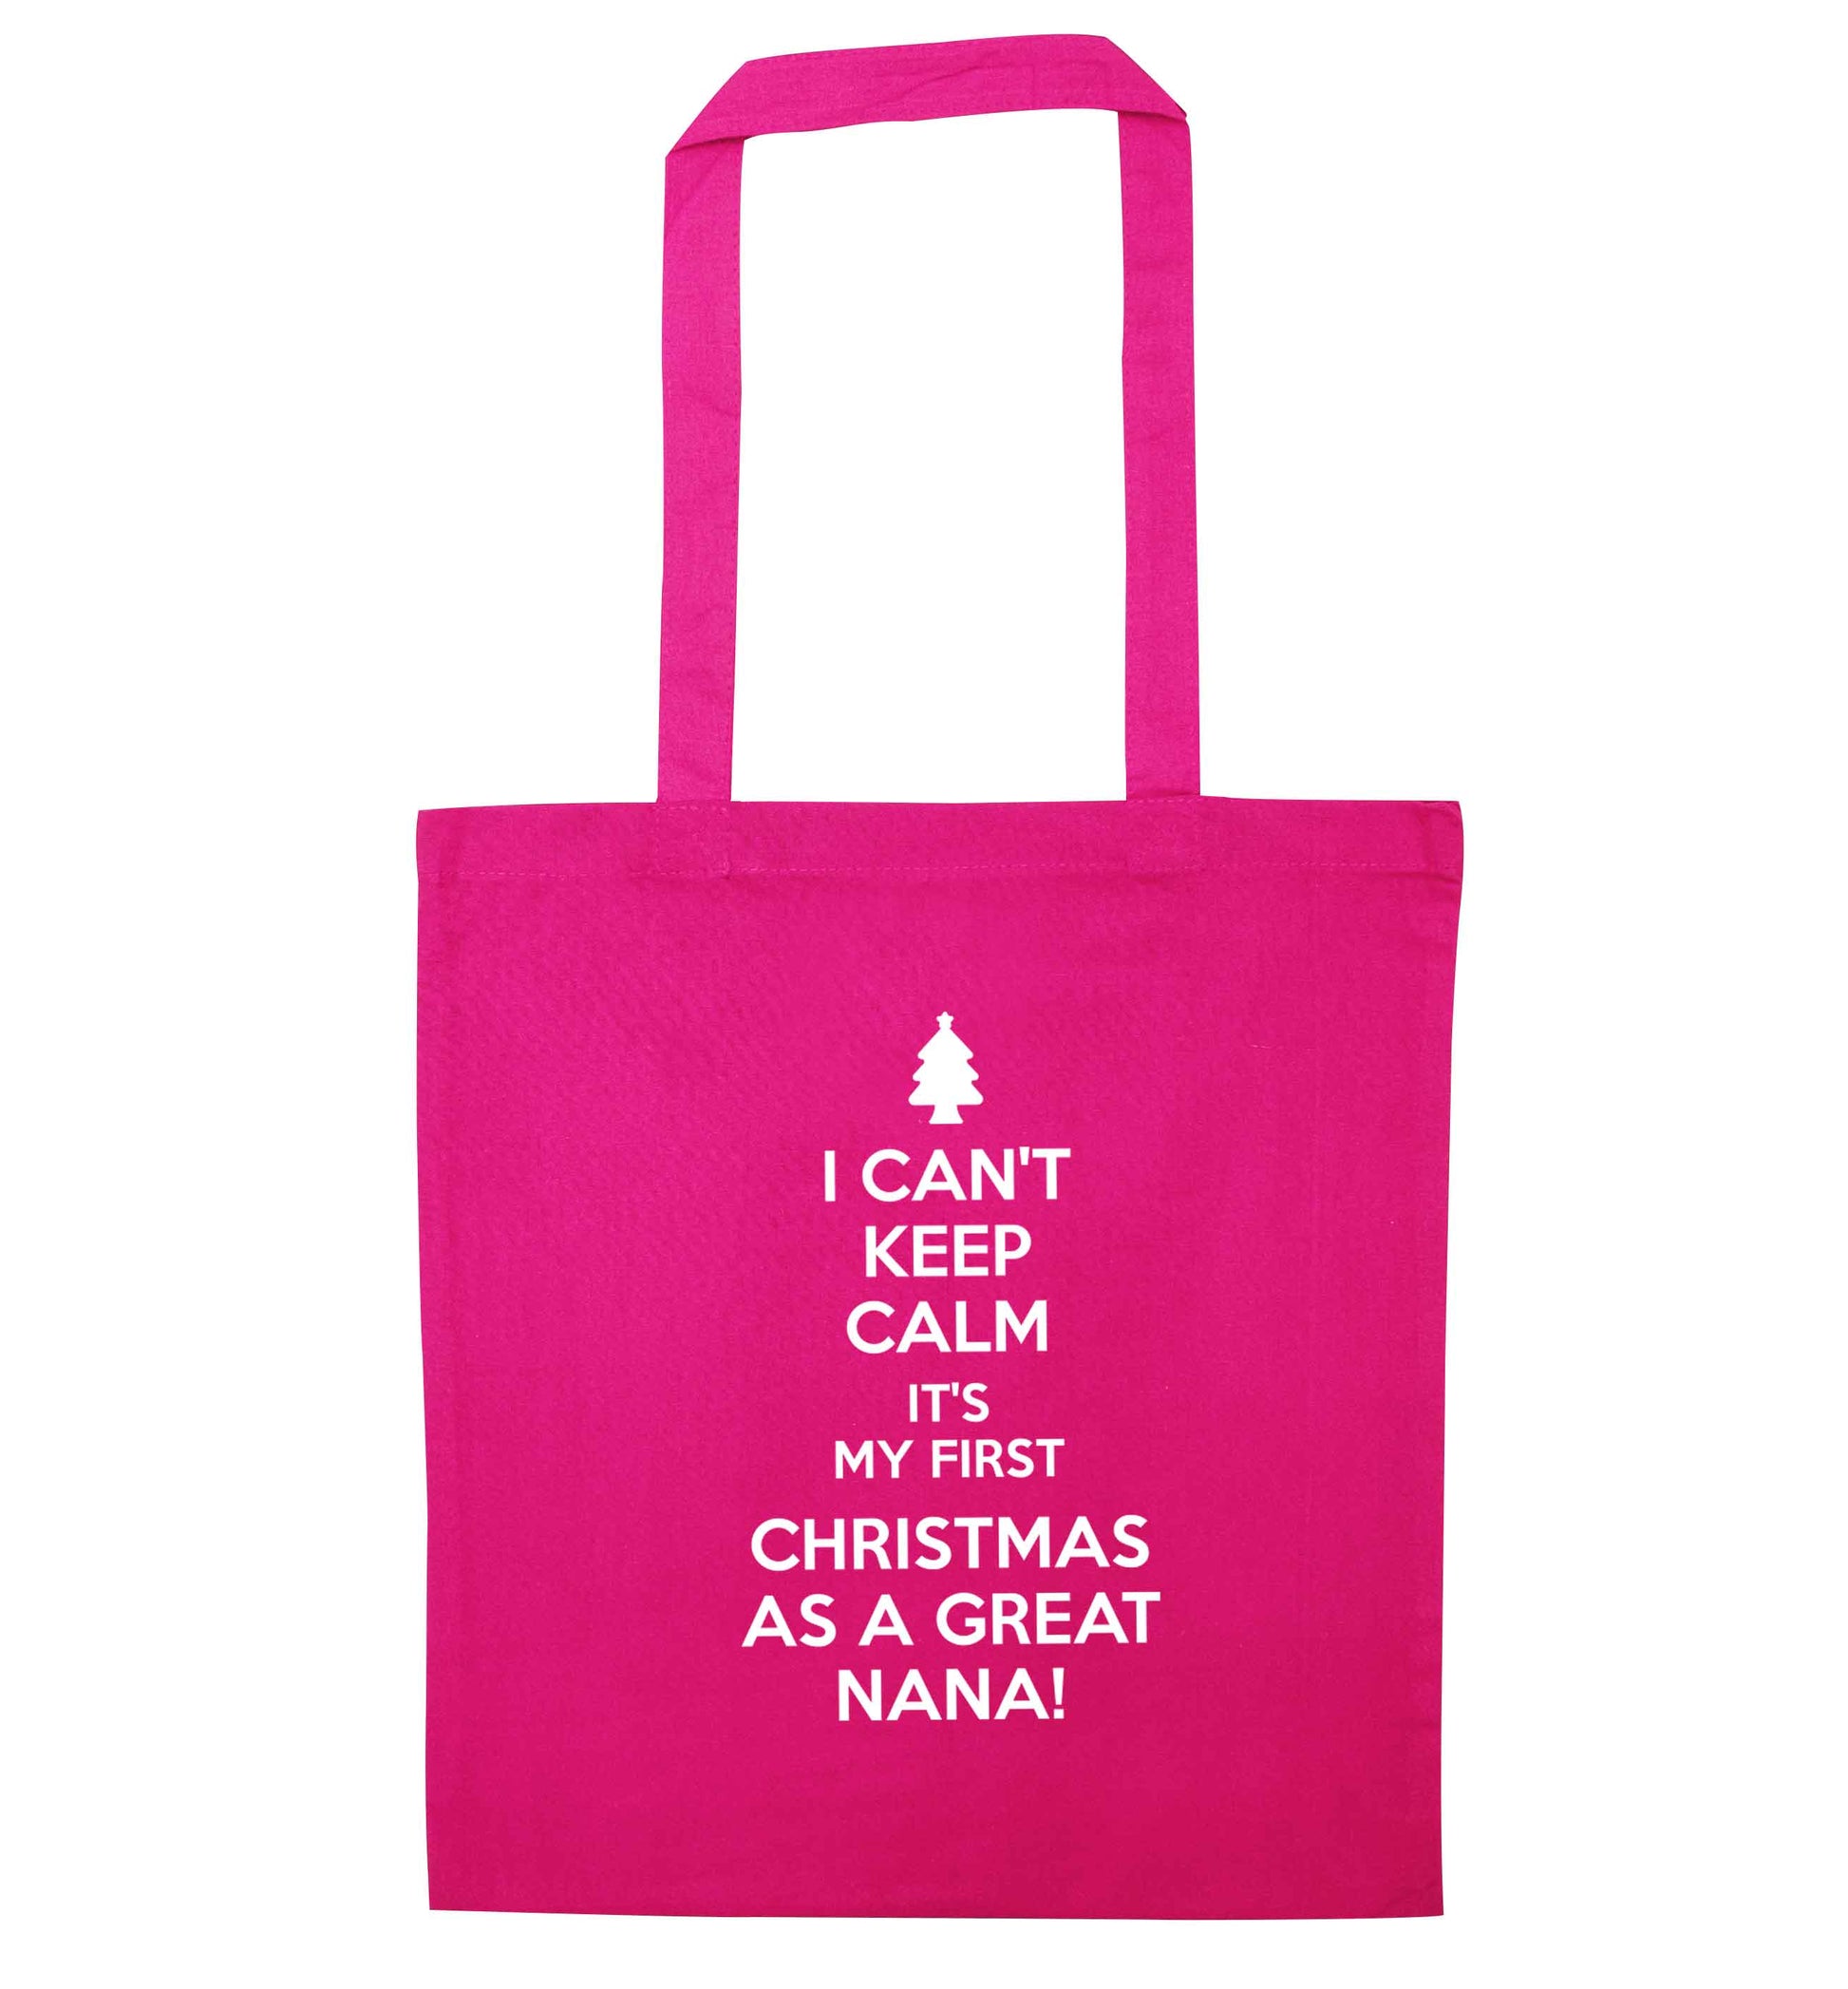 I can't keep calm it's my first Christmas as a great nana! pink tote bag